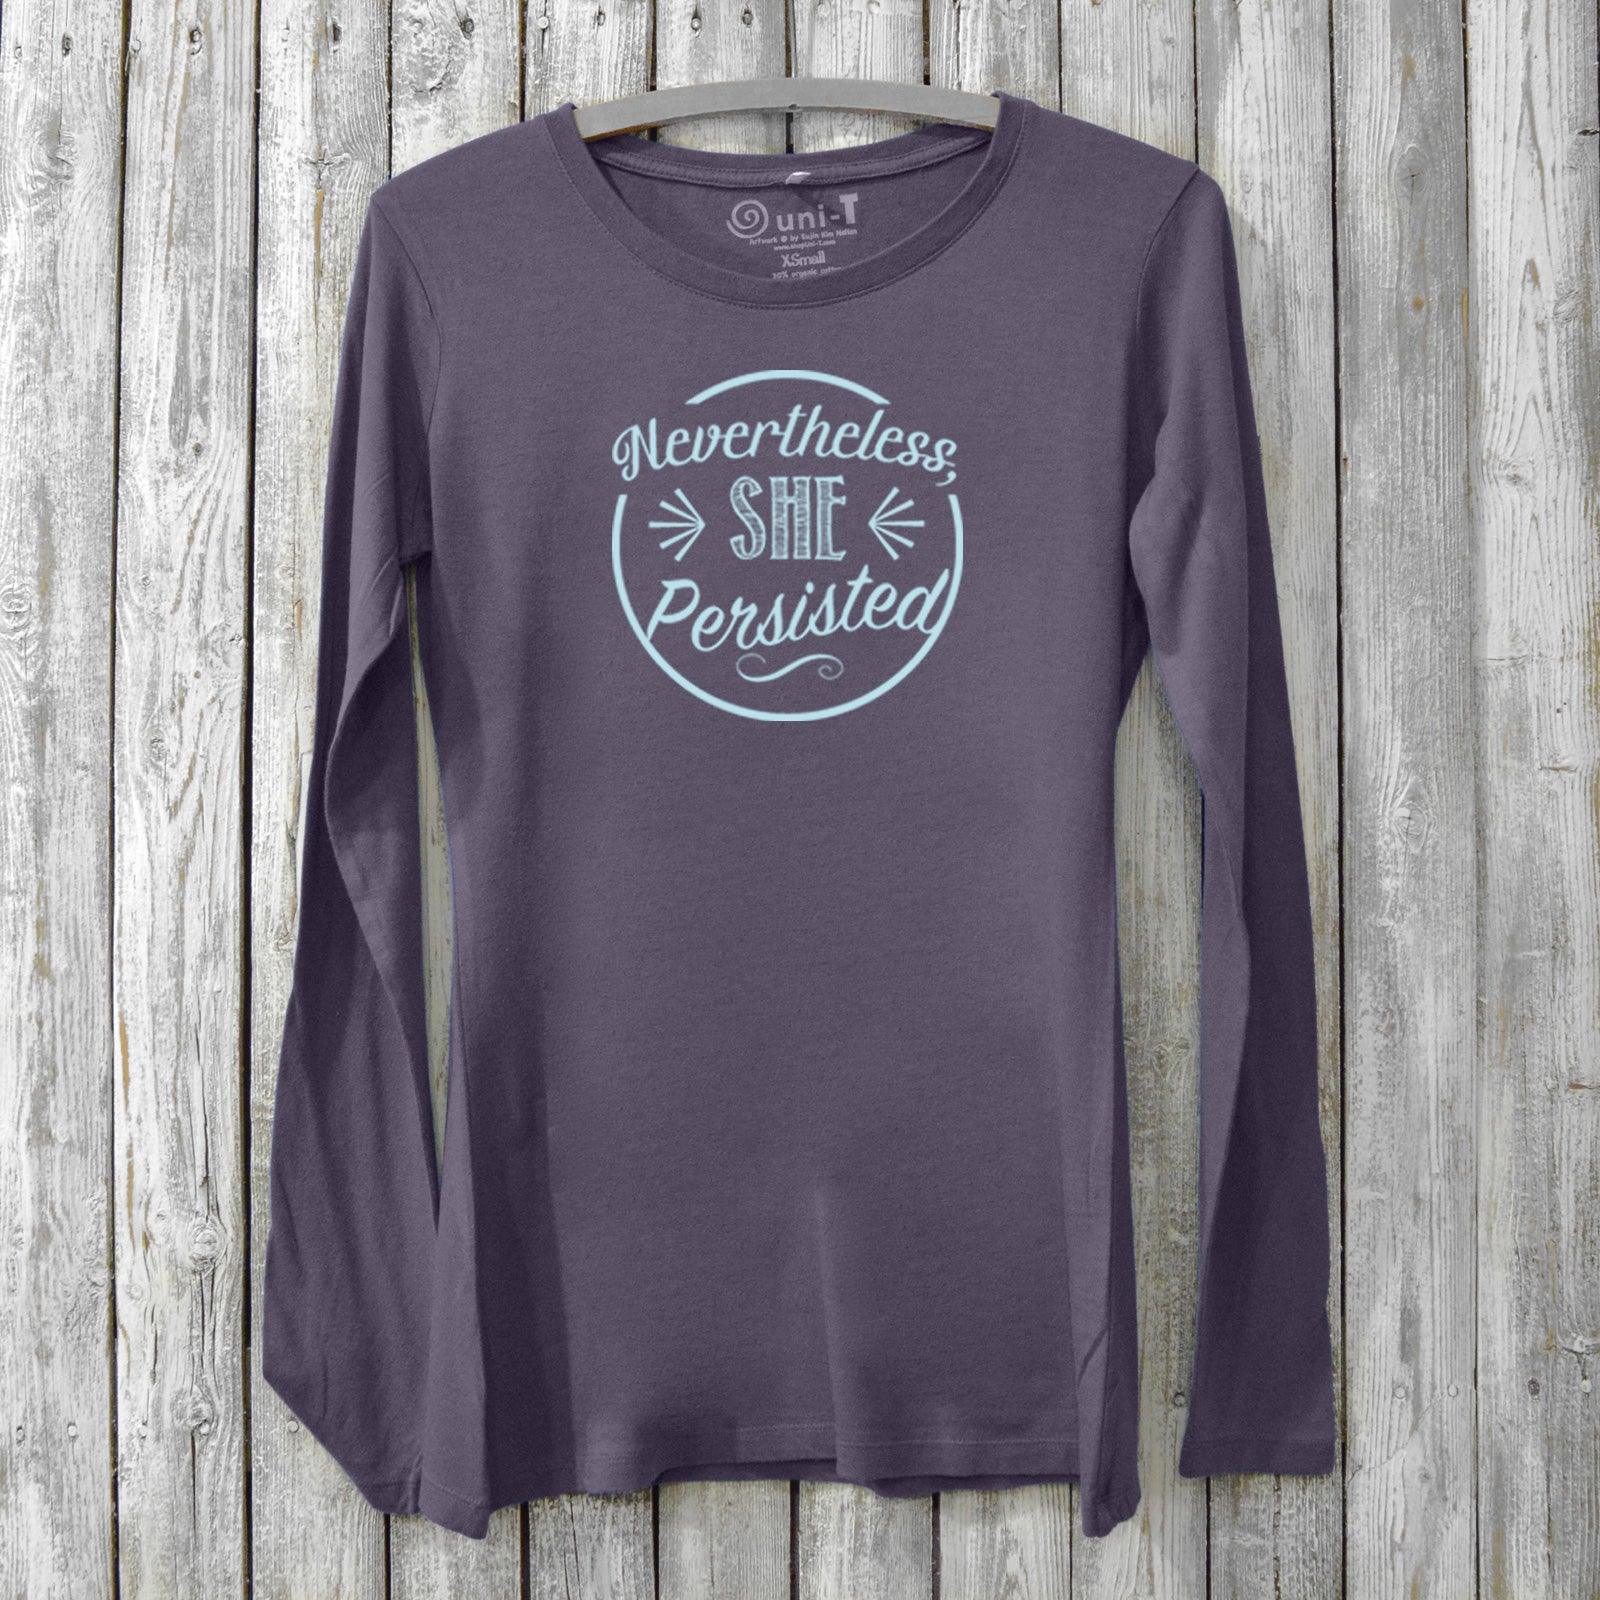 Nevertheless She Persisted Long Sleeve Shirt for Women Uni-T